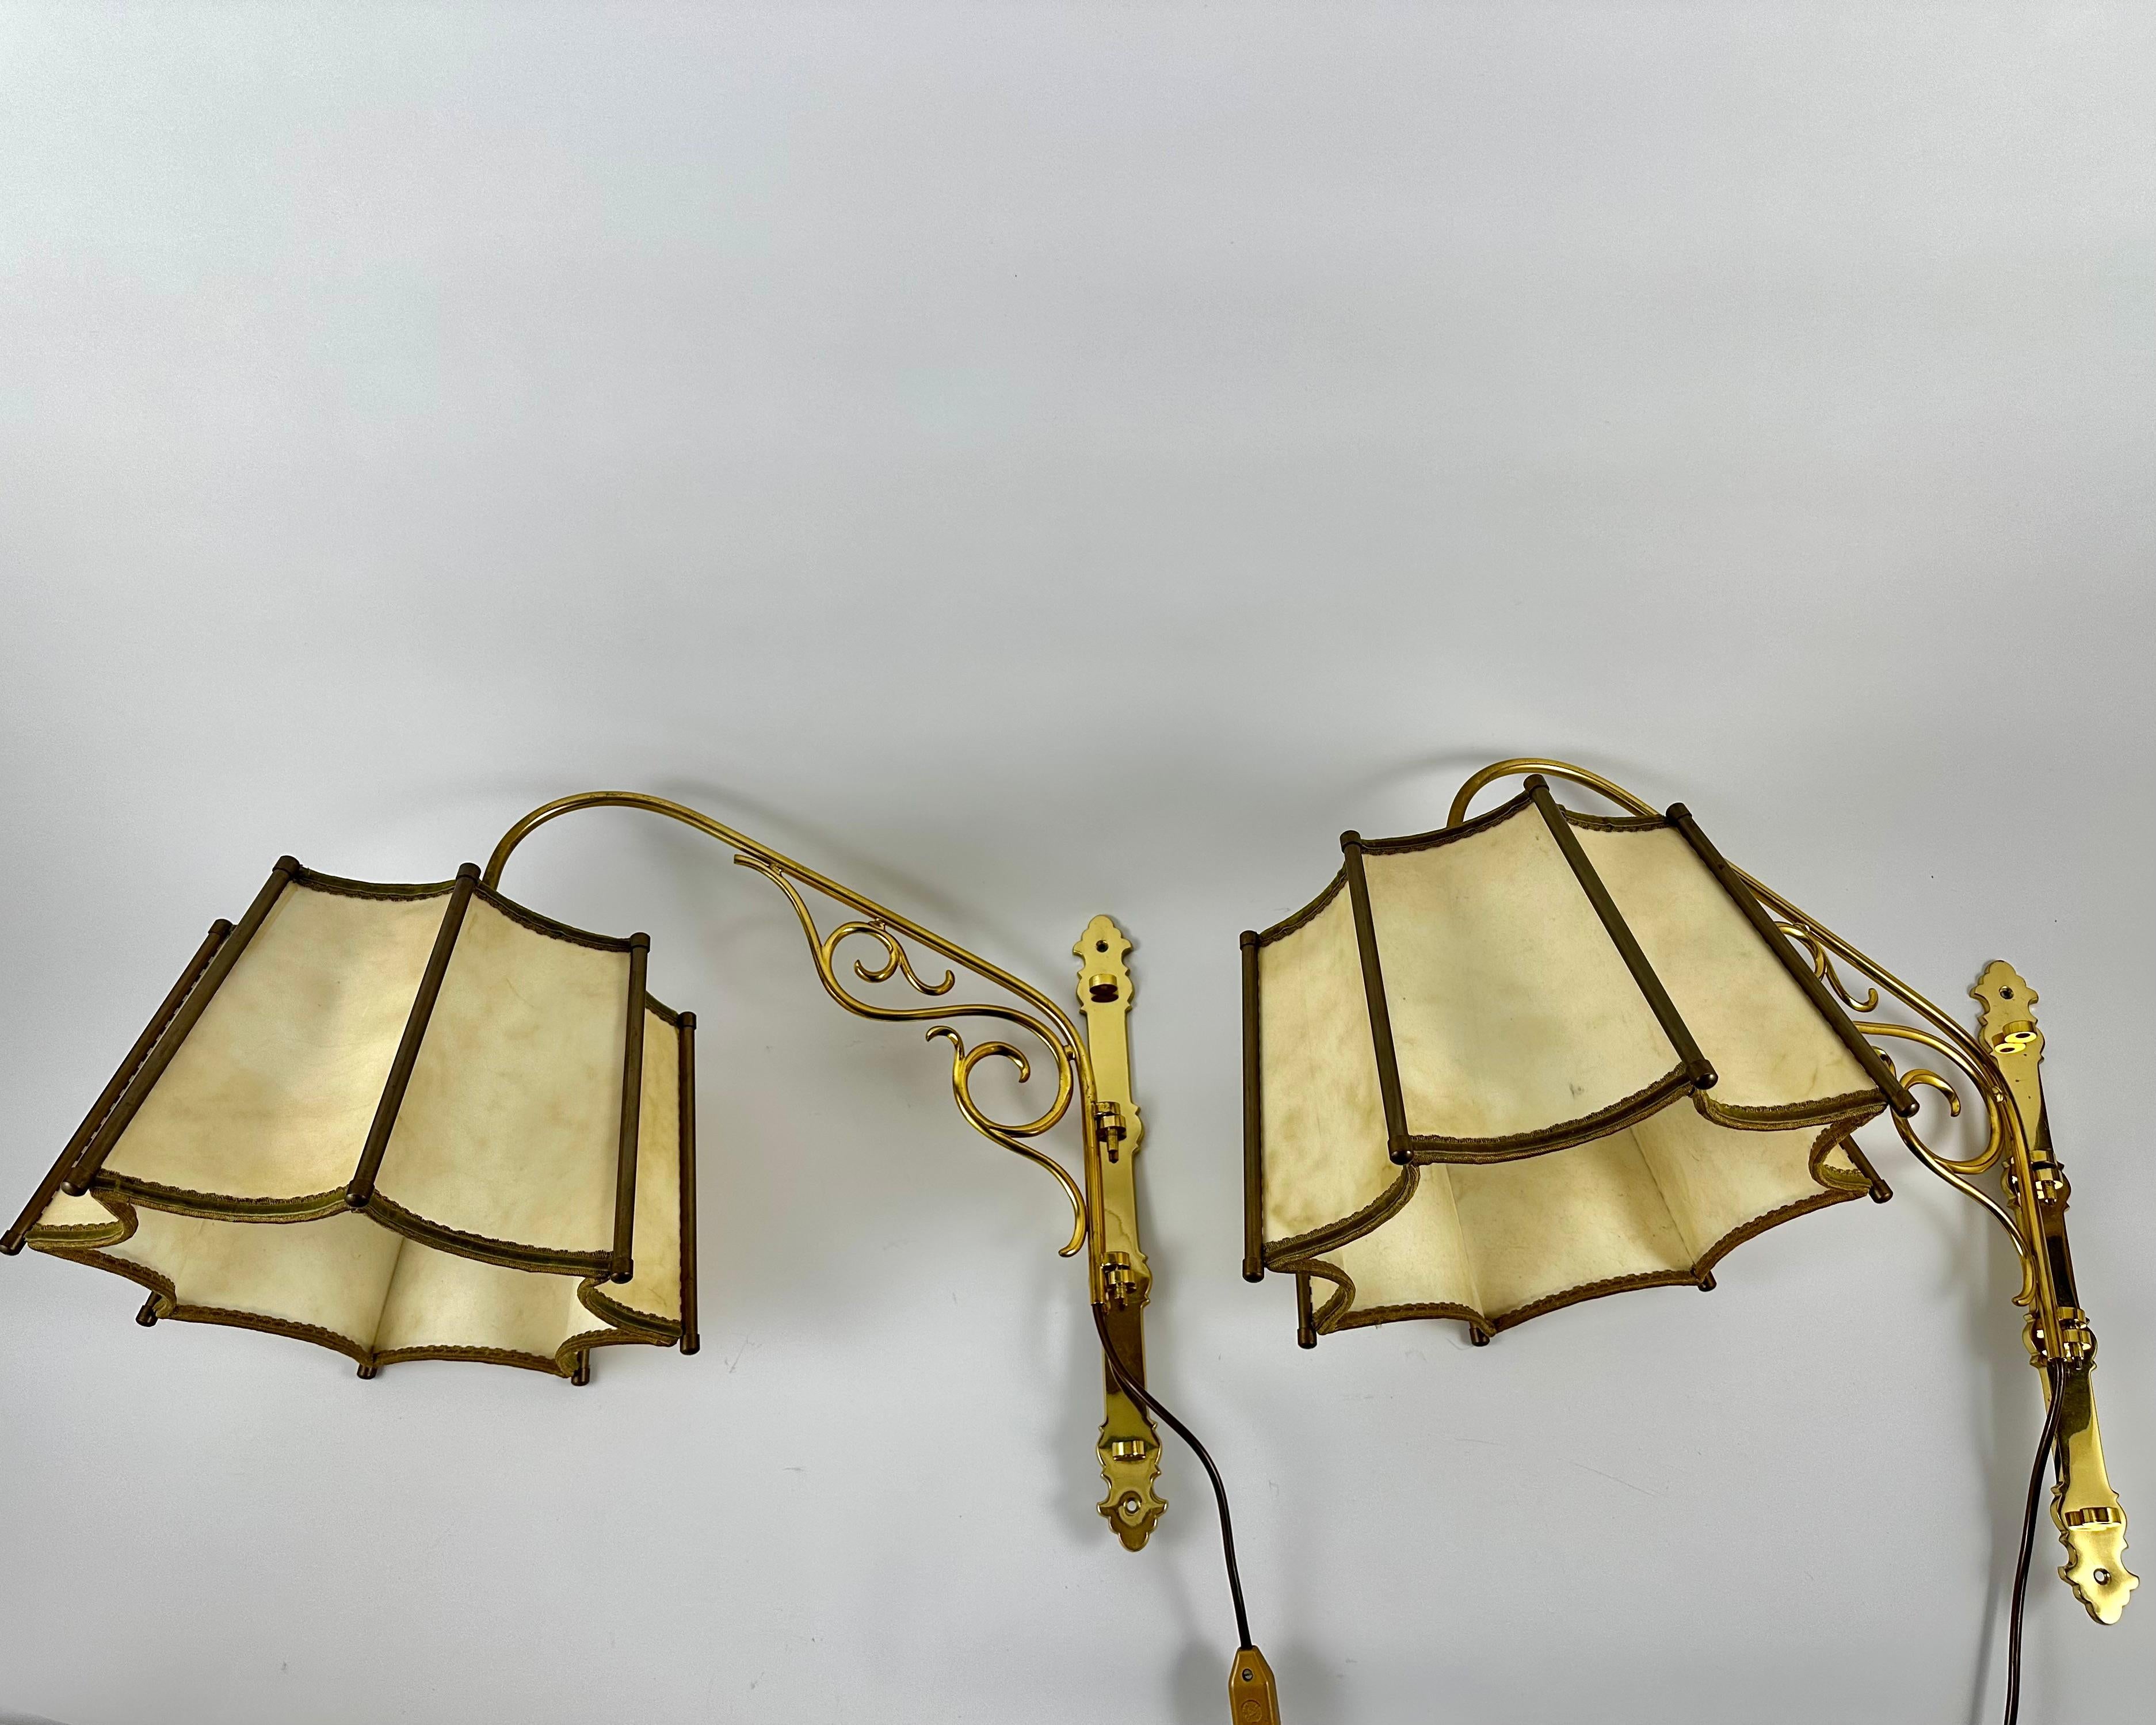 Vintage Wall Sconces With Leather Shade Bedside Lighting, Set 2, Germany, 1950s For Sale 5